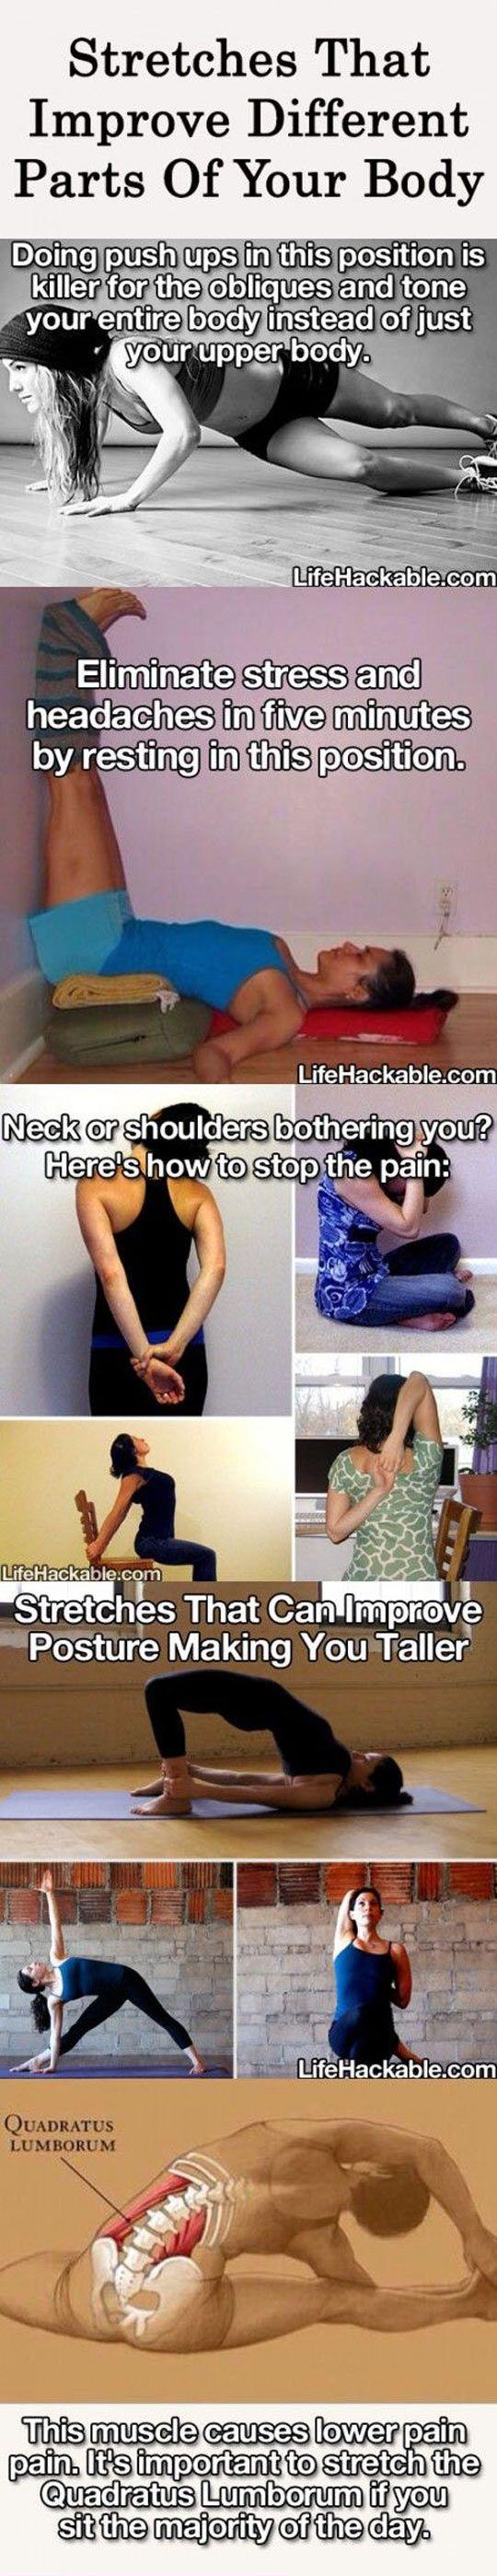 Wedding - Types Of Stretches